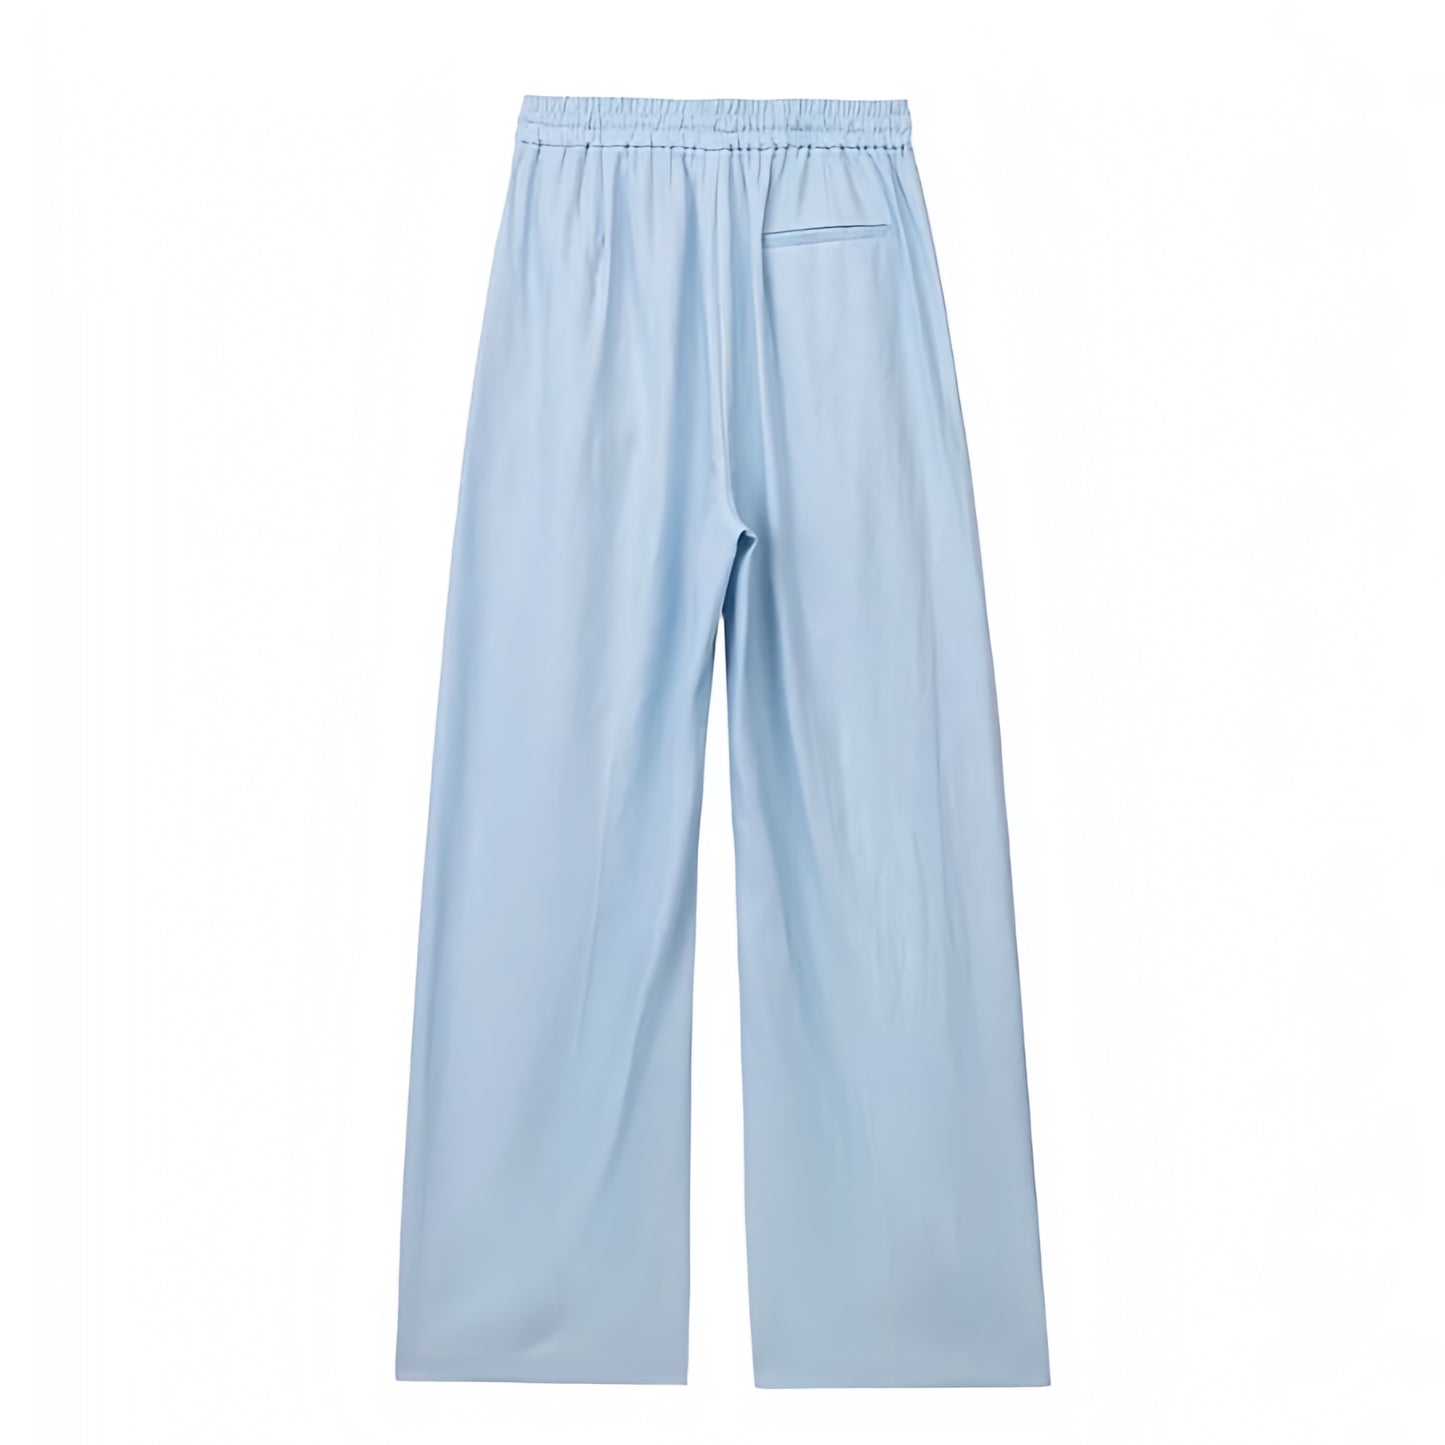 light-blue-cotton-linen-mid-low-rise-waisted-draw-string-tie-fitted-waist-straight-wide-leg-loose-trouser-pants-joggers-sweatpants-with-pockets-comfortable-cozy-women-ladies-chic-trendy-spring-2024-summer-elegant-casual-feminine-lounge-european-vacation-beach-wear-coastal-granddaughter-zara-revolve-aritzia-brandy-melville-pacsun